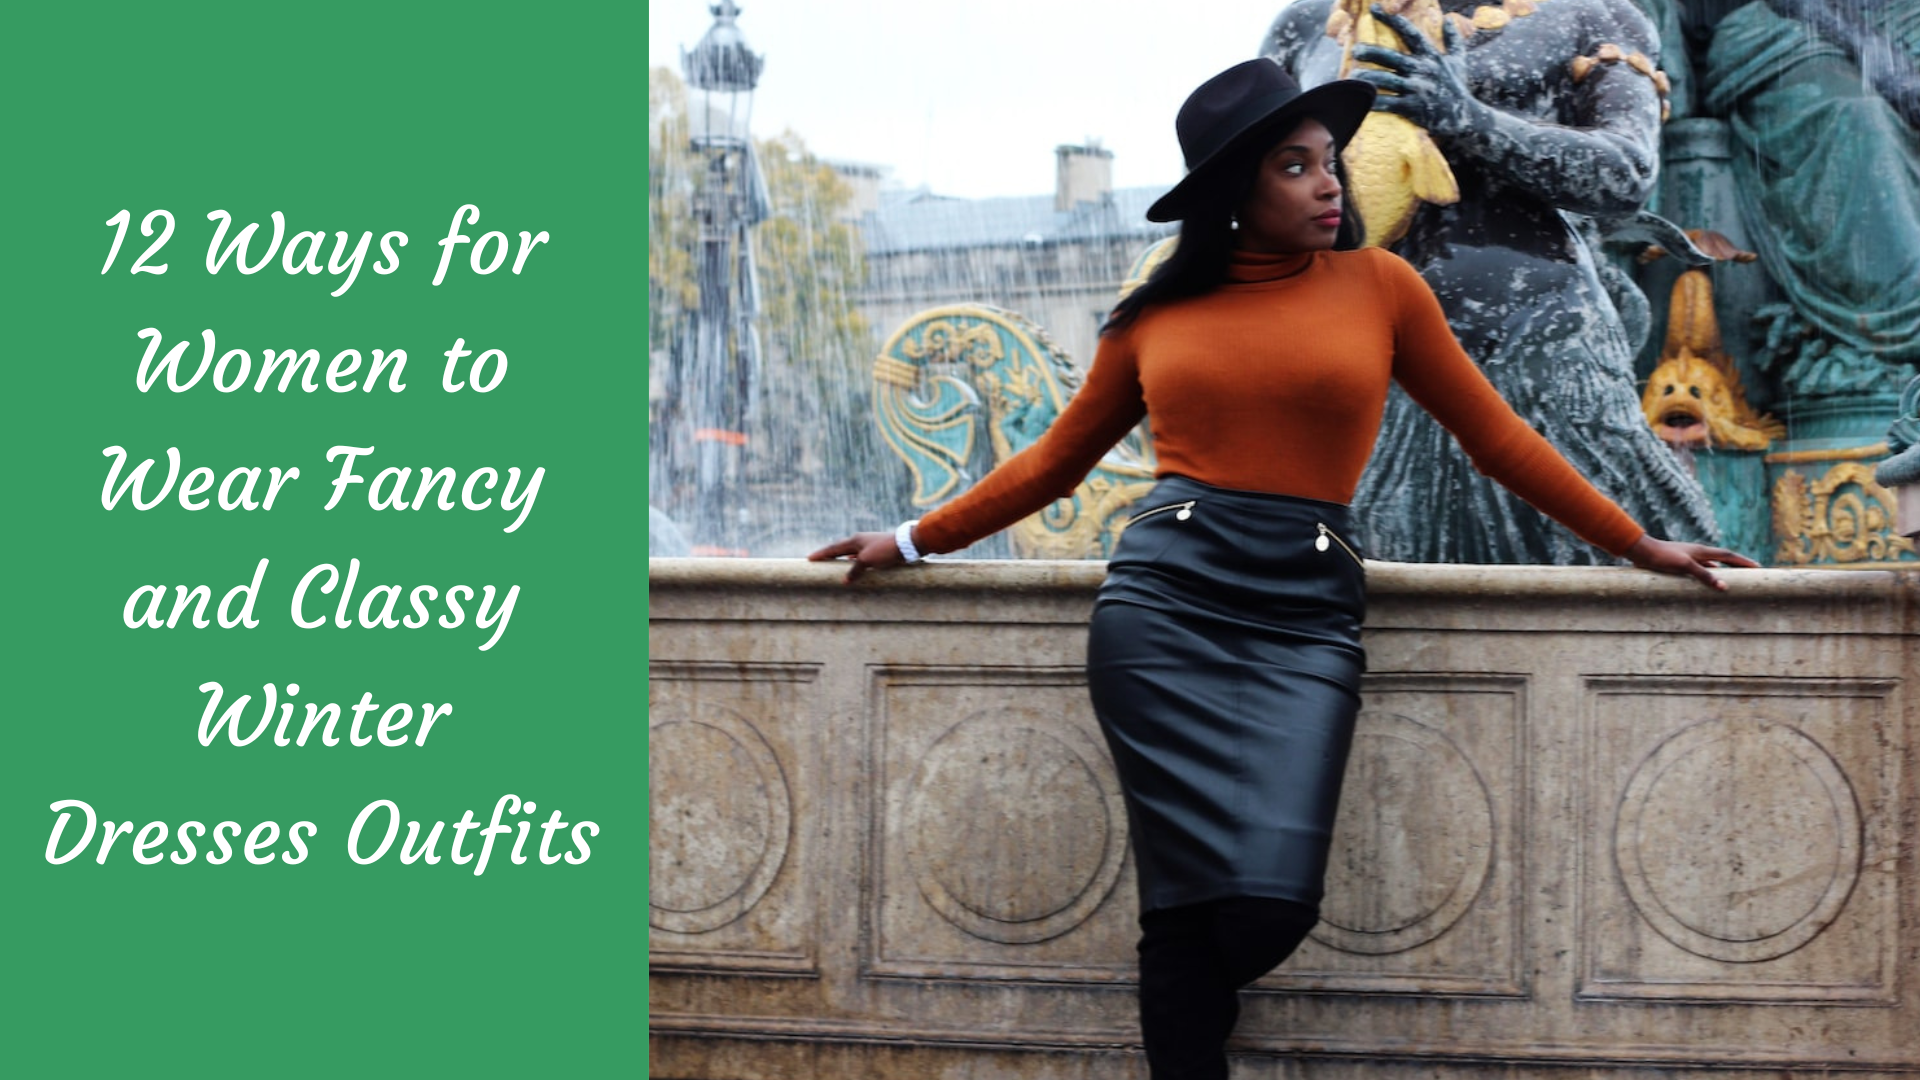 12 Ways for Women Wear Fancy and Classy Winter Dresses Outfits